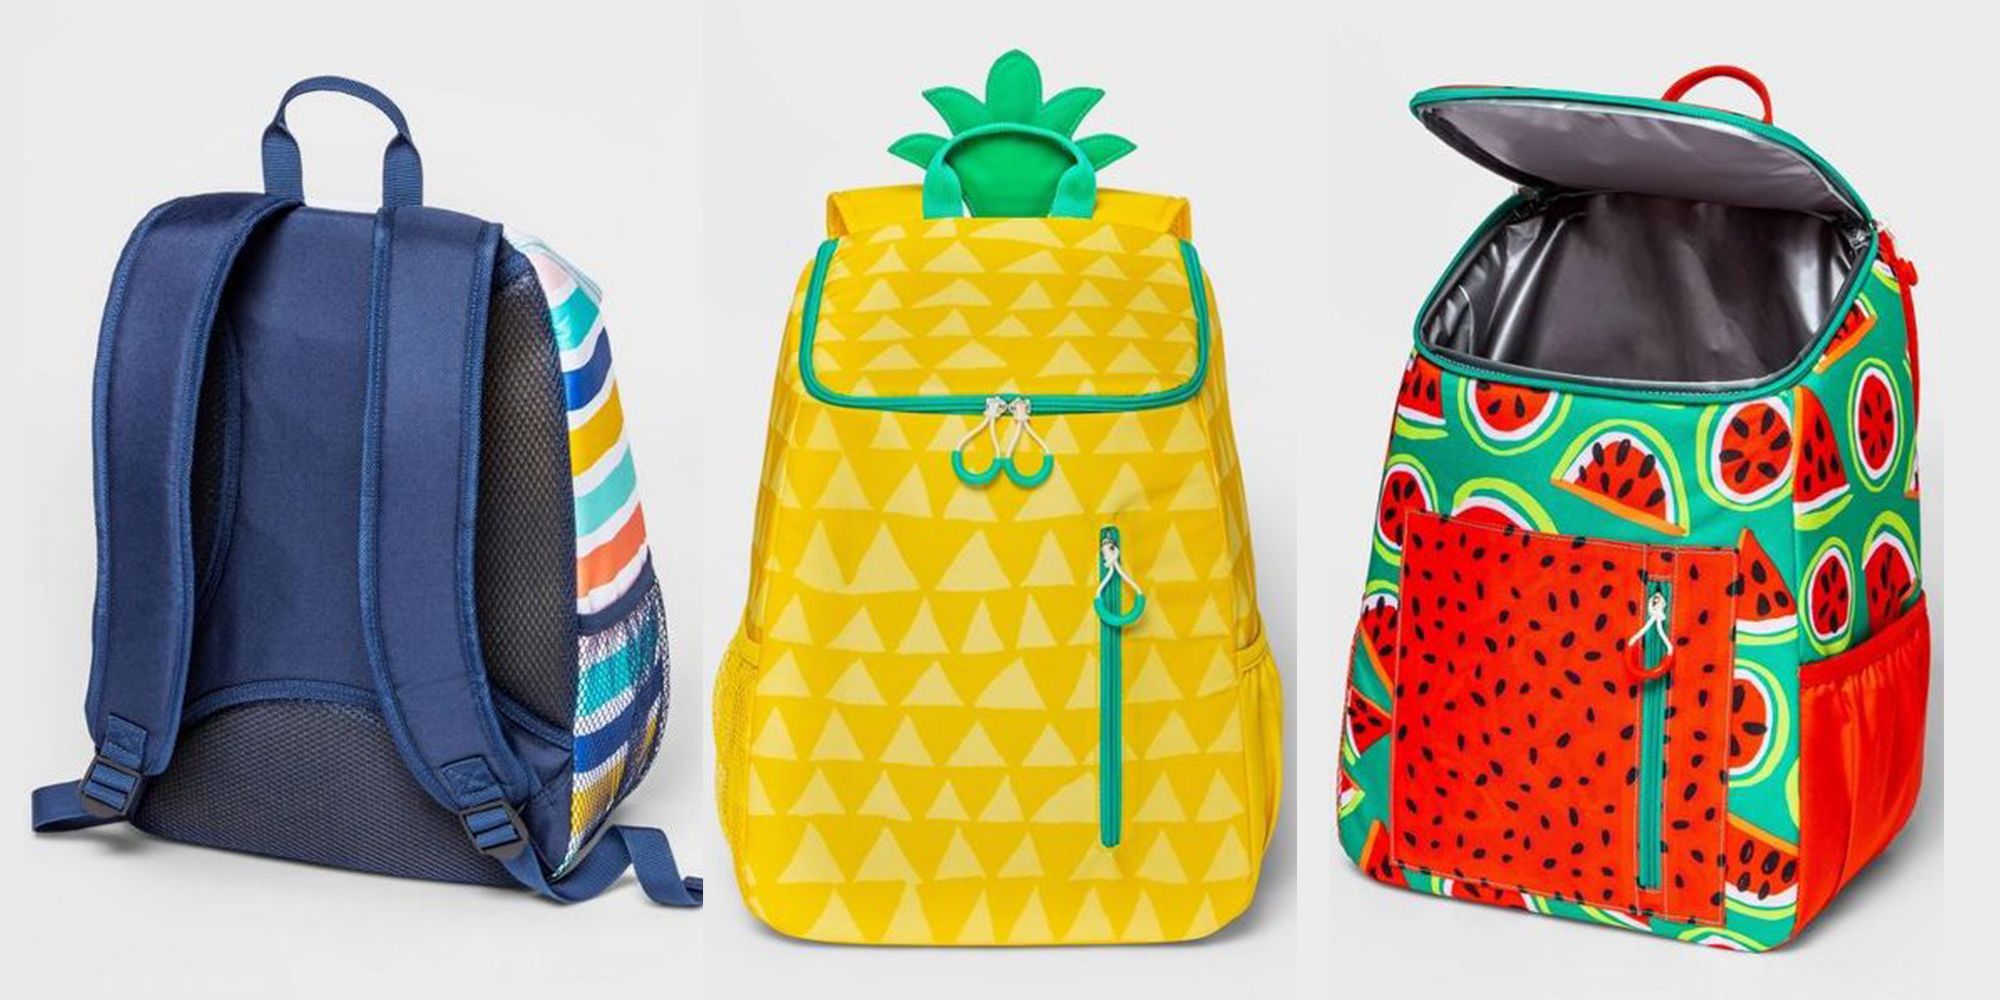 Target Is Selling $20 Backpack Coolers That You'll Bring